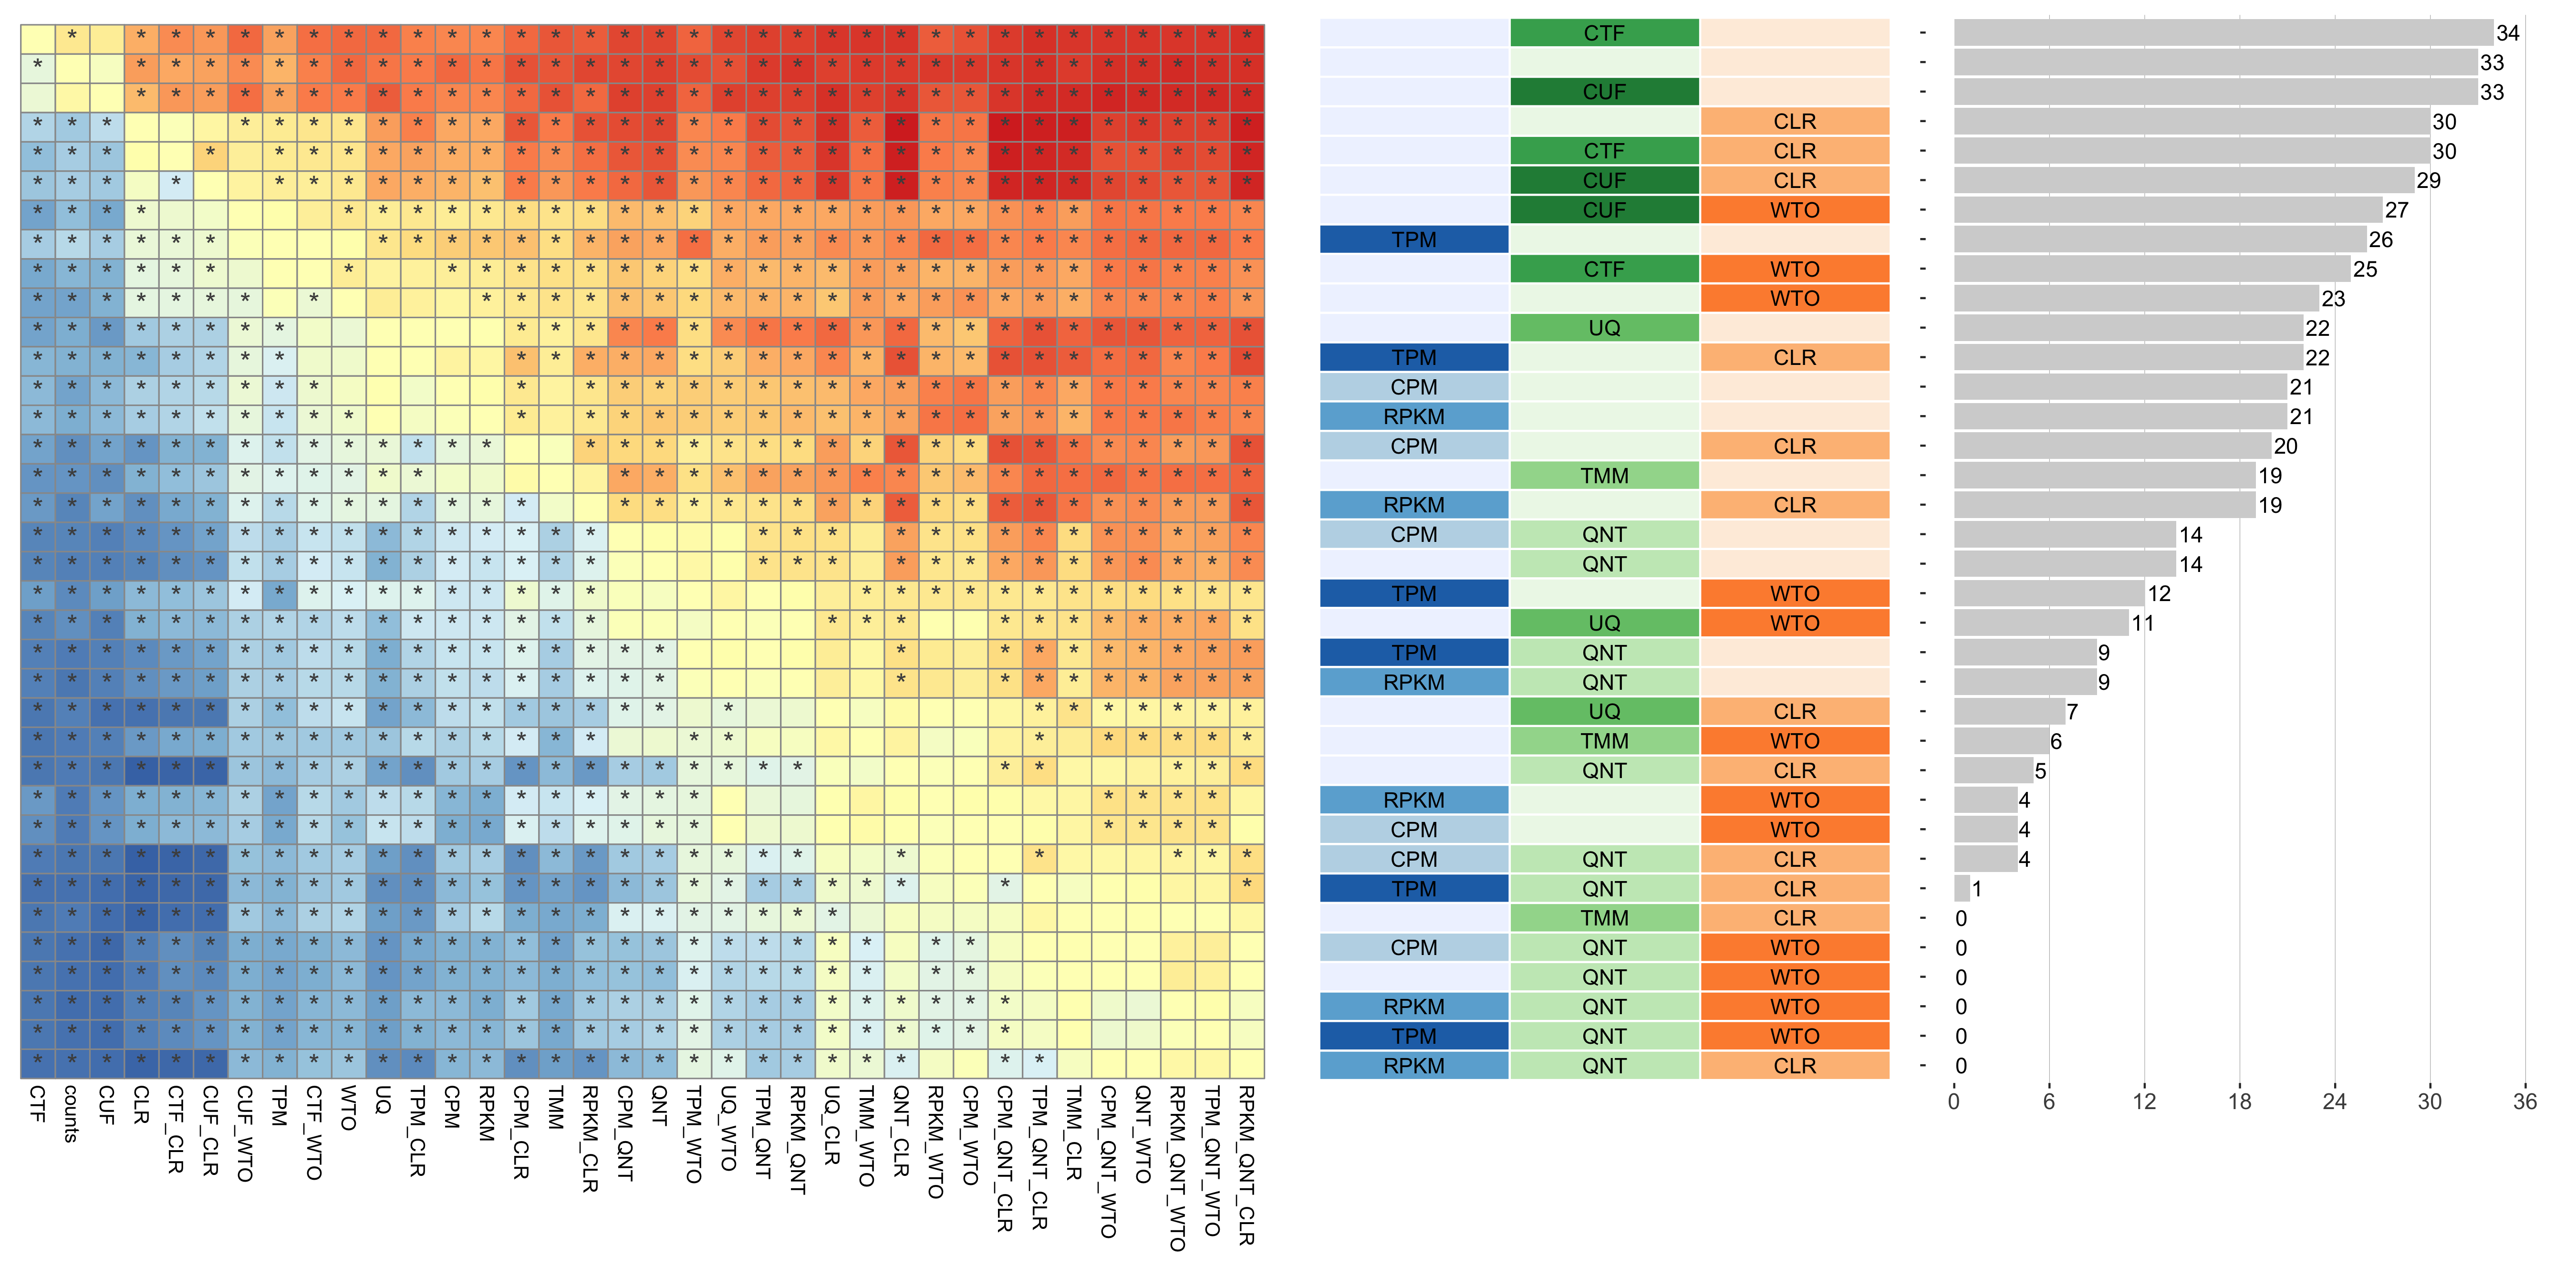 **Dataset-level pairwise comparison of workflow performance.** (**left**) The heatmap shows the relative performance of a pair of workflows, corresponding to a row and a column, directly compared to each other for the SRA datasets based on the tissue-naive gold standard. The color in each cell (row, column) represents the proportion of datasets for which the workflow along the row has a higher log2(auPRC/prior) than the workflow along the column. Comparisons that are statistically significant (corrected p < 0.01) based on a paired Wilcoxon test are marked with an asterisk. (**middle**) The workflows (rows) are described in terms of the specific method used in the within-sample normalization (blues), between-sample normalization (greens), and network transformation (oranges) stages. (**right**) The barplot shows the number of times each workflow was significantly greater than another workflow.